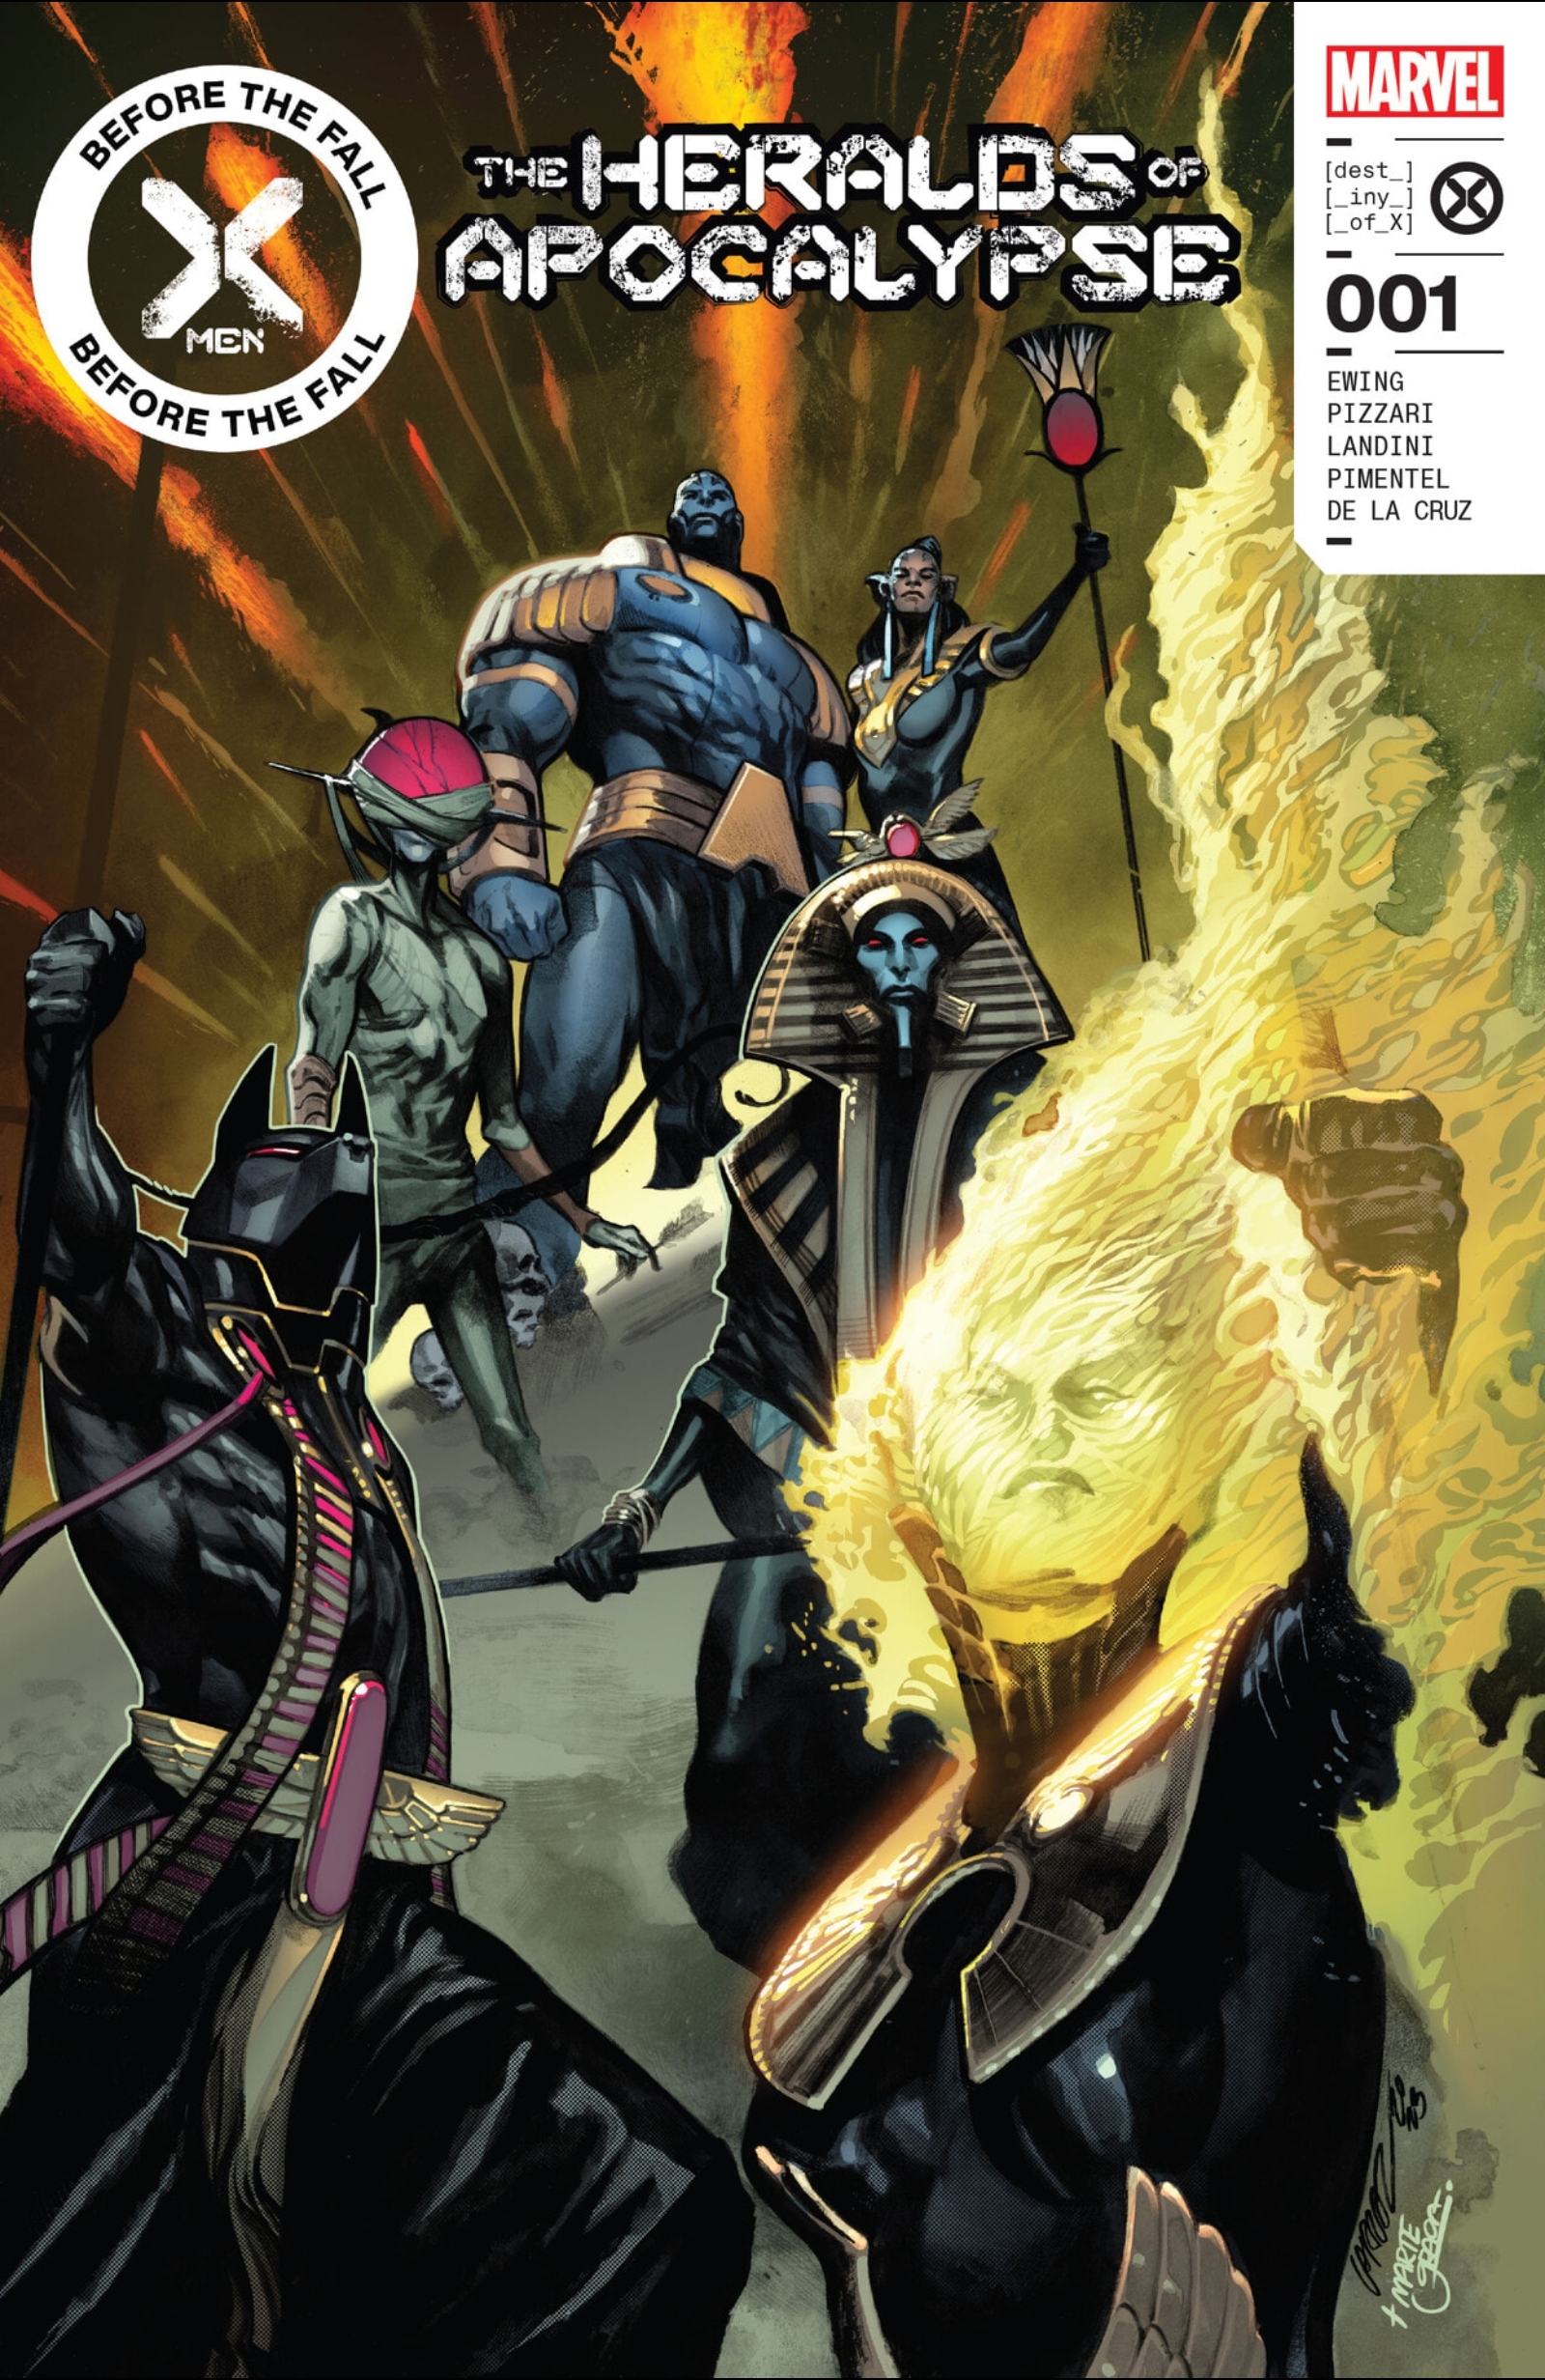 Read online X-Men: Before the Fall comic -  Issue # Heralds of Apocalypse - 1